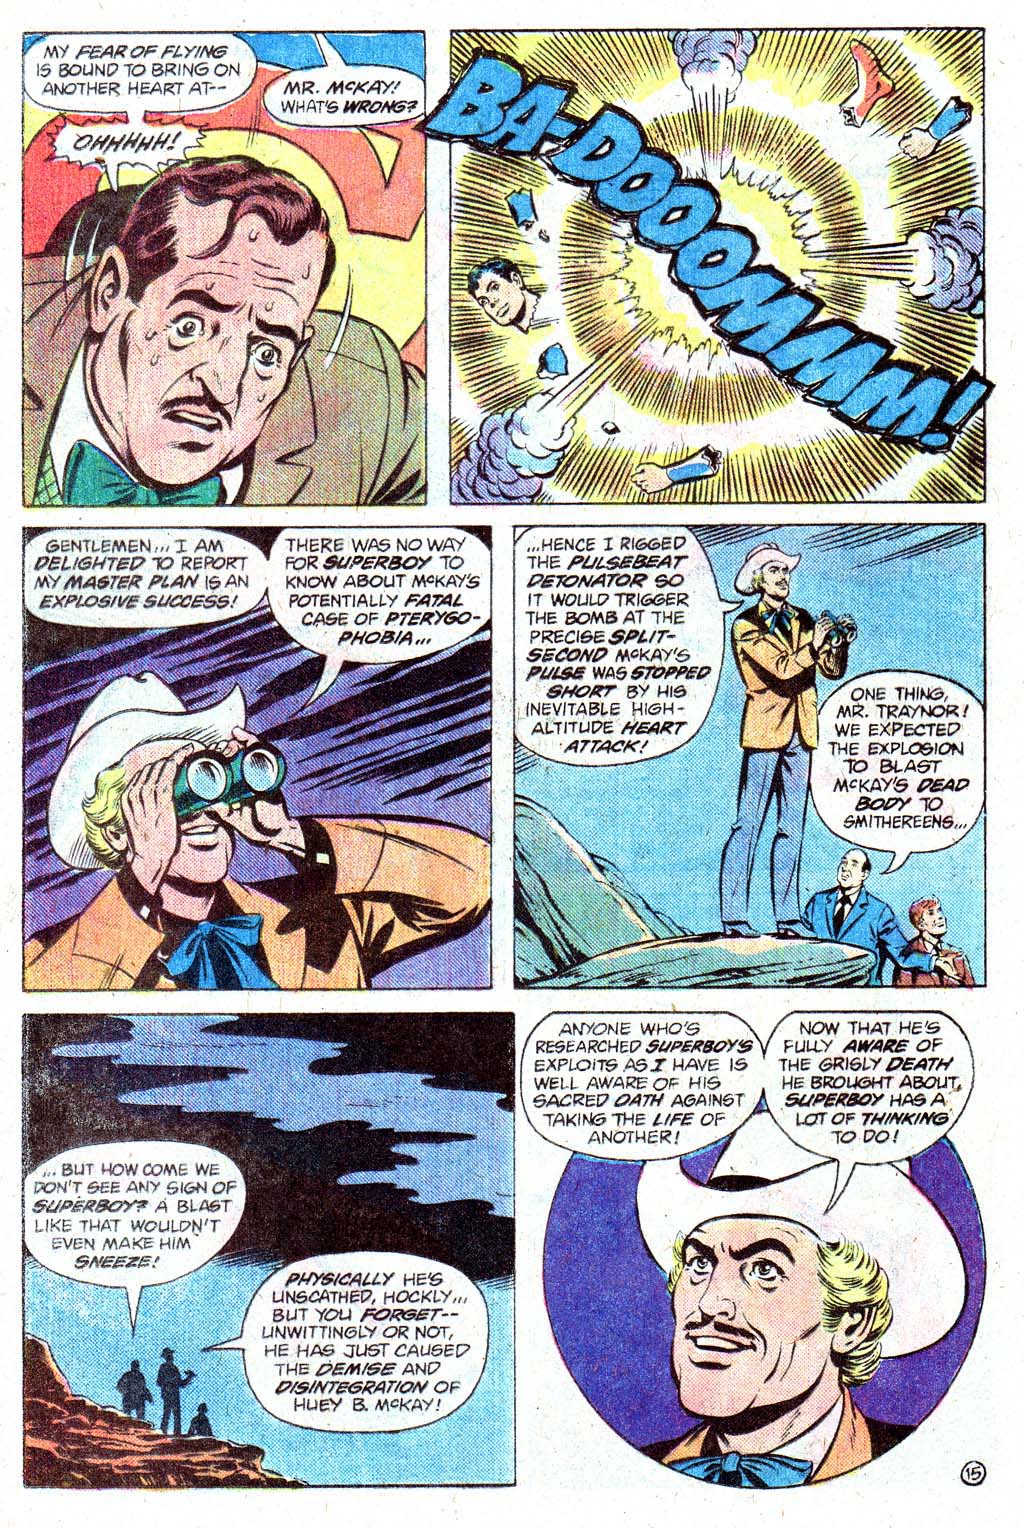 The New Adventures of Superboy 29 Page 19